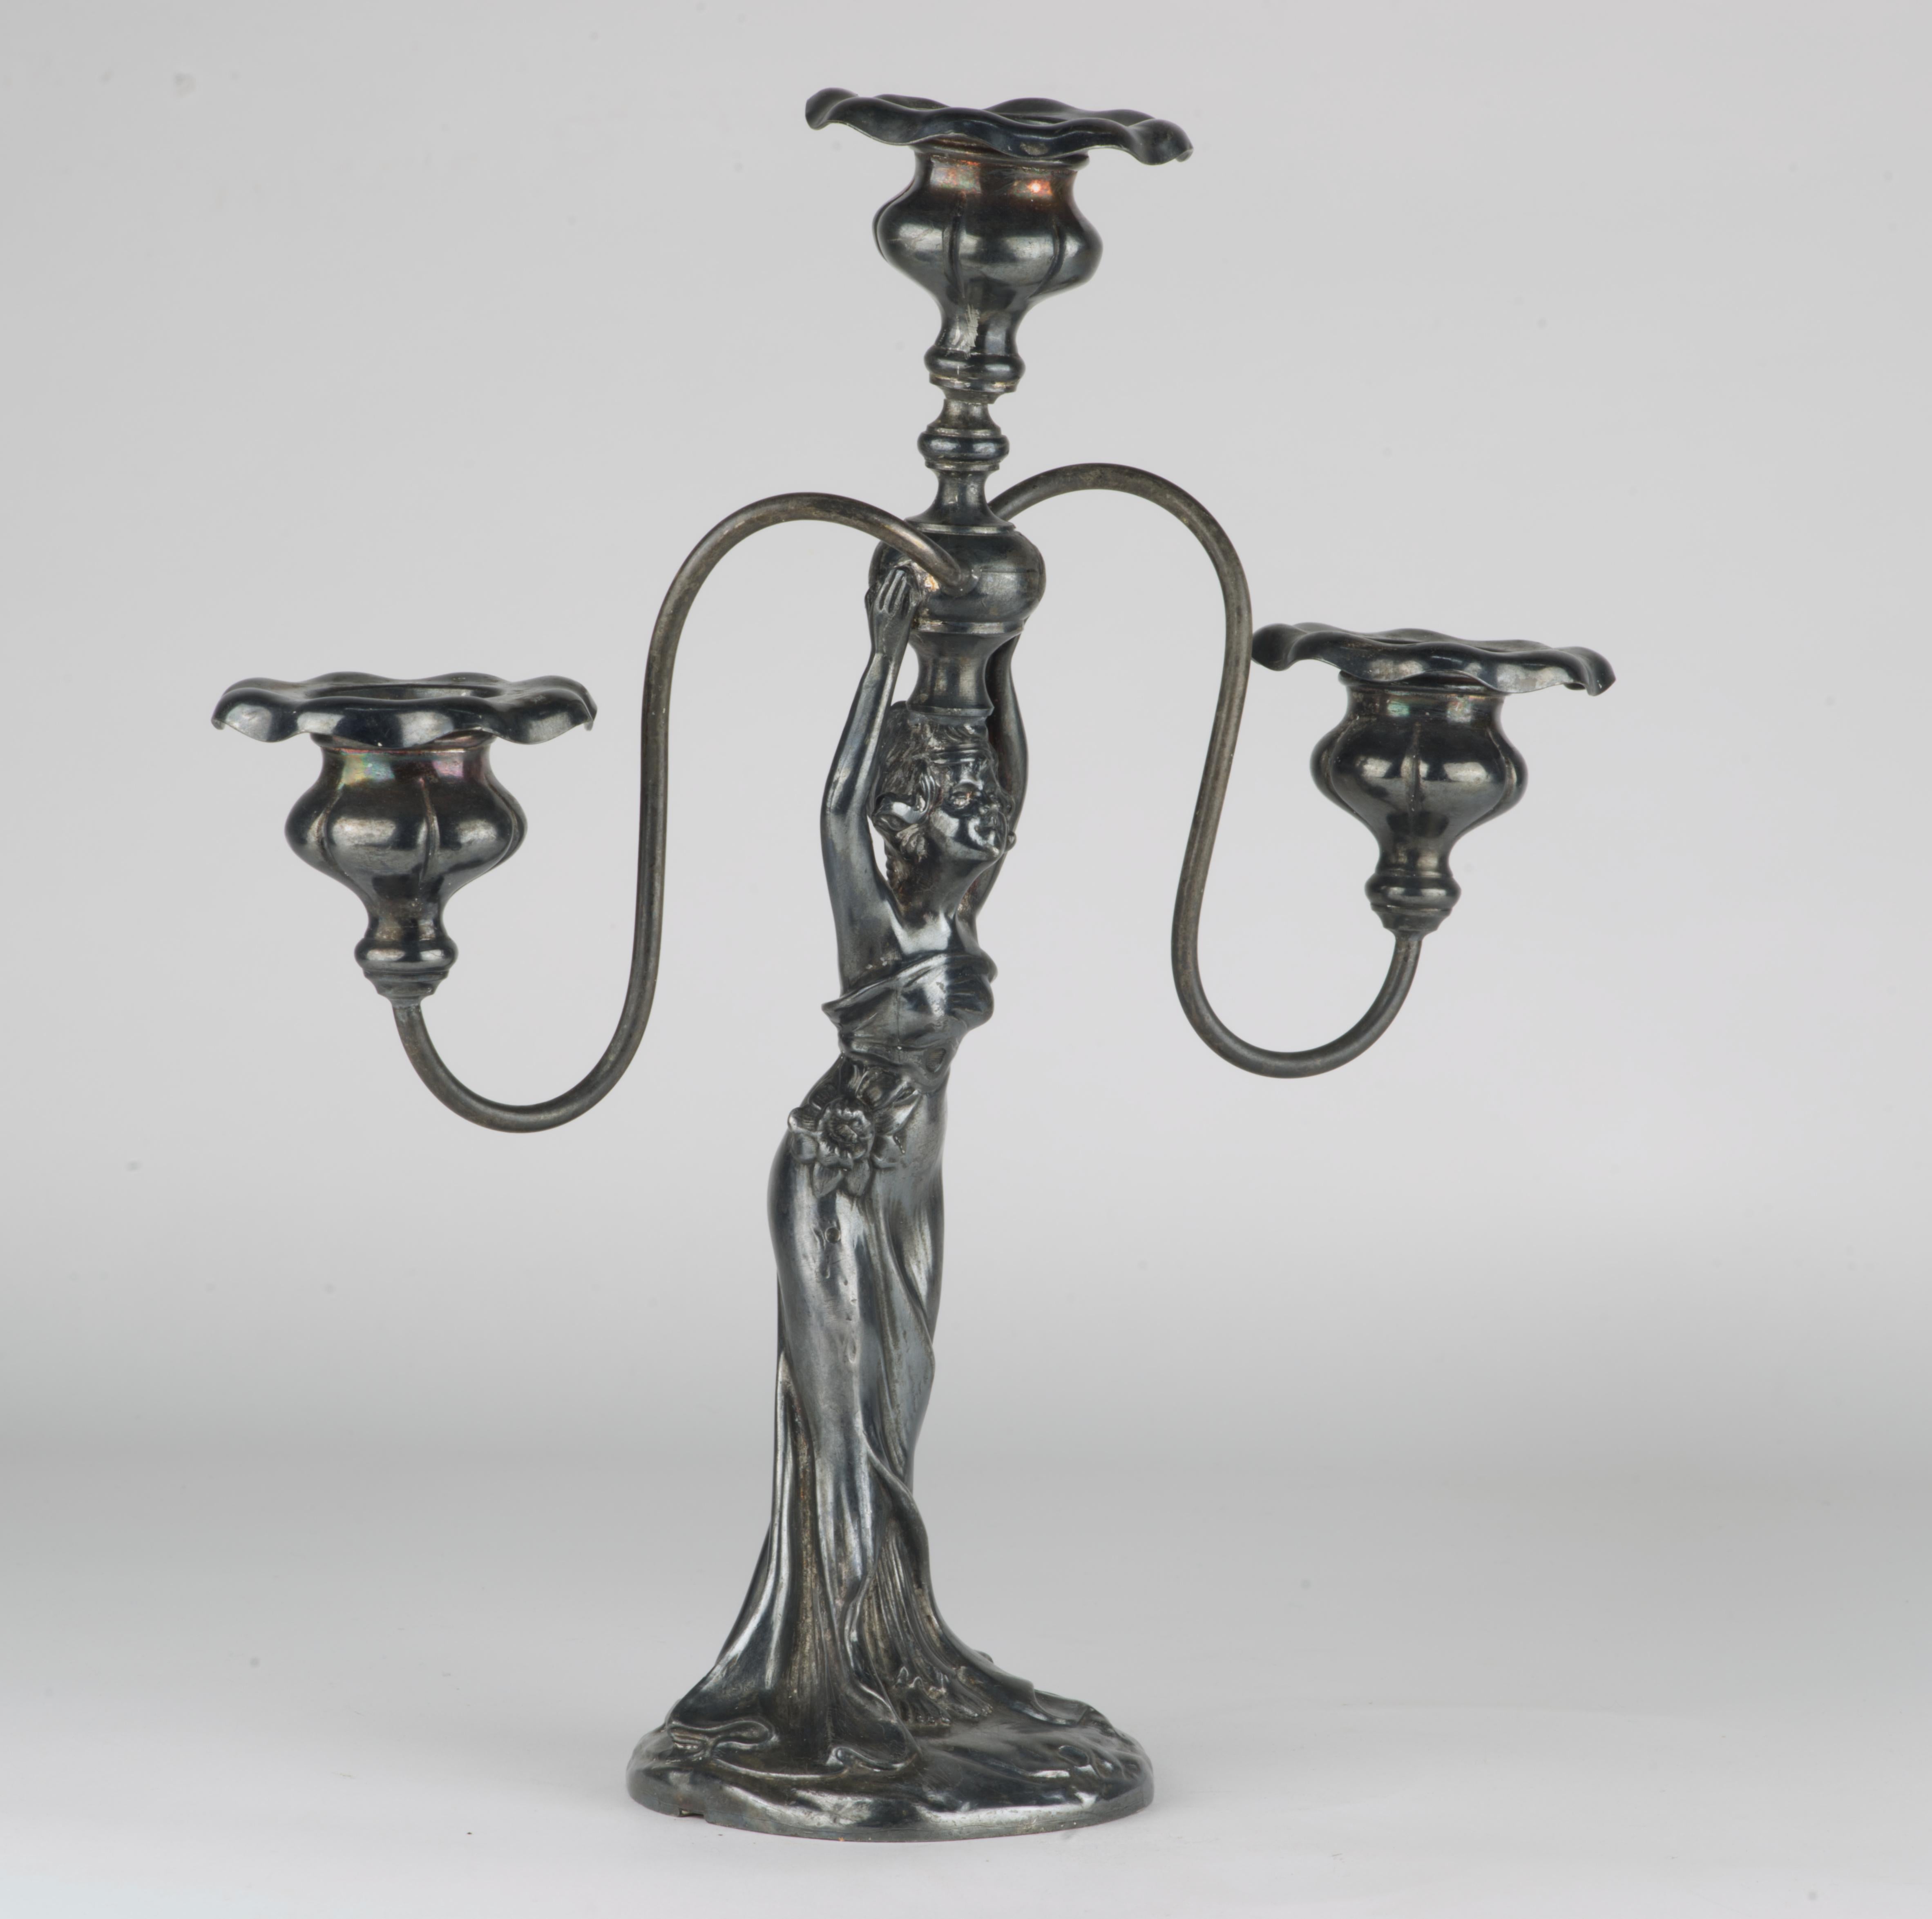  E.G. Webster and Sons silver plate candlestick has three arms with flower shaped bobeche. The stem is done in shape of a standing woman in elegant, flowing dress, standing on a rounded base and holding the central arm on a ball above her head with